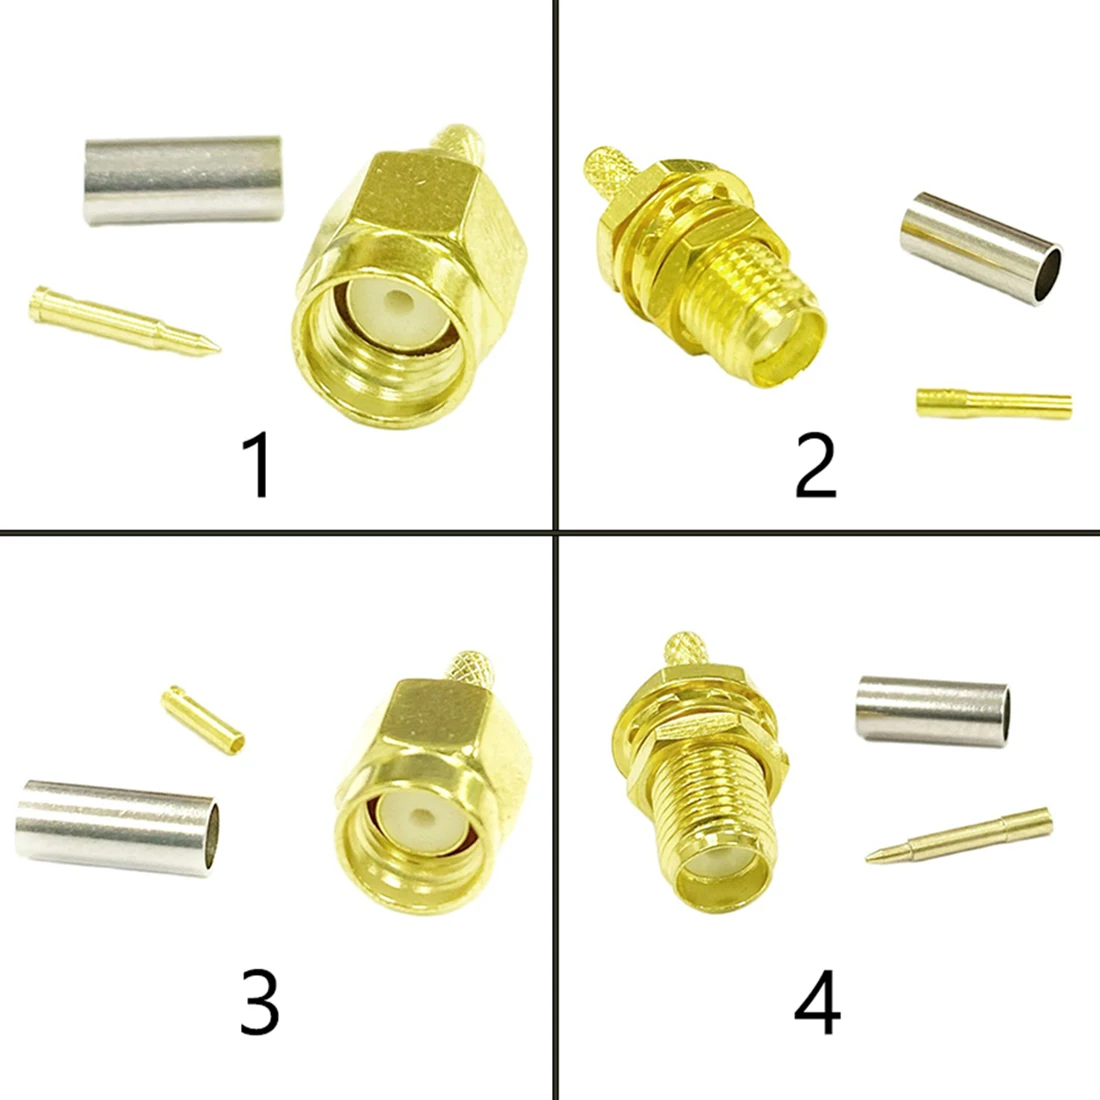 New 1- 10PCS SMA  Male Plug Female Jack /RP RF Coax Connector Crimp For LMR100 RG174 RG316 Cable Straight Goldplated Adapter